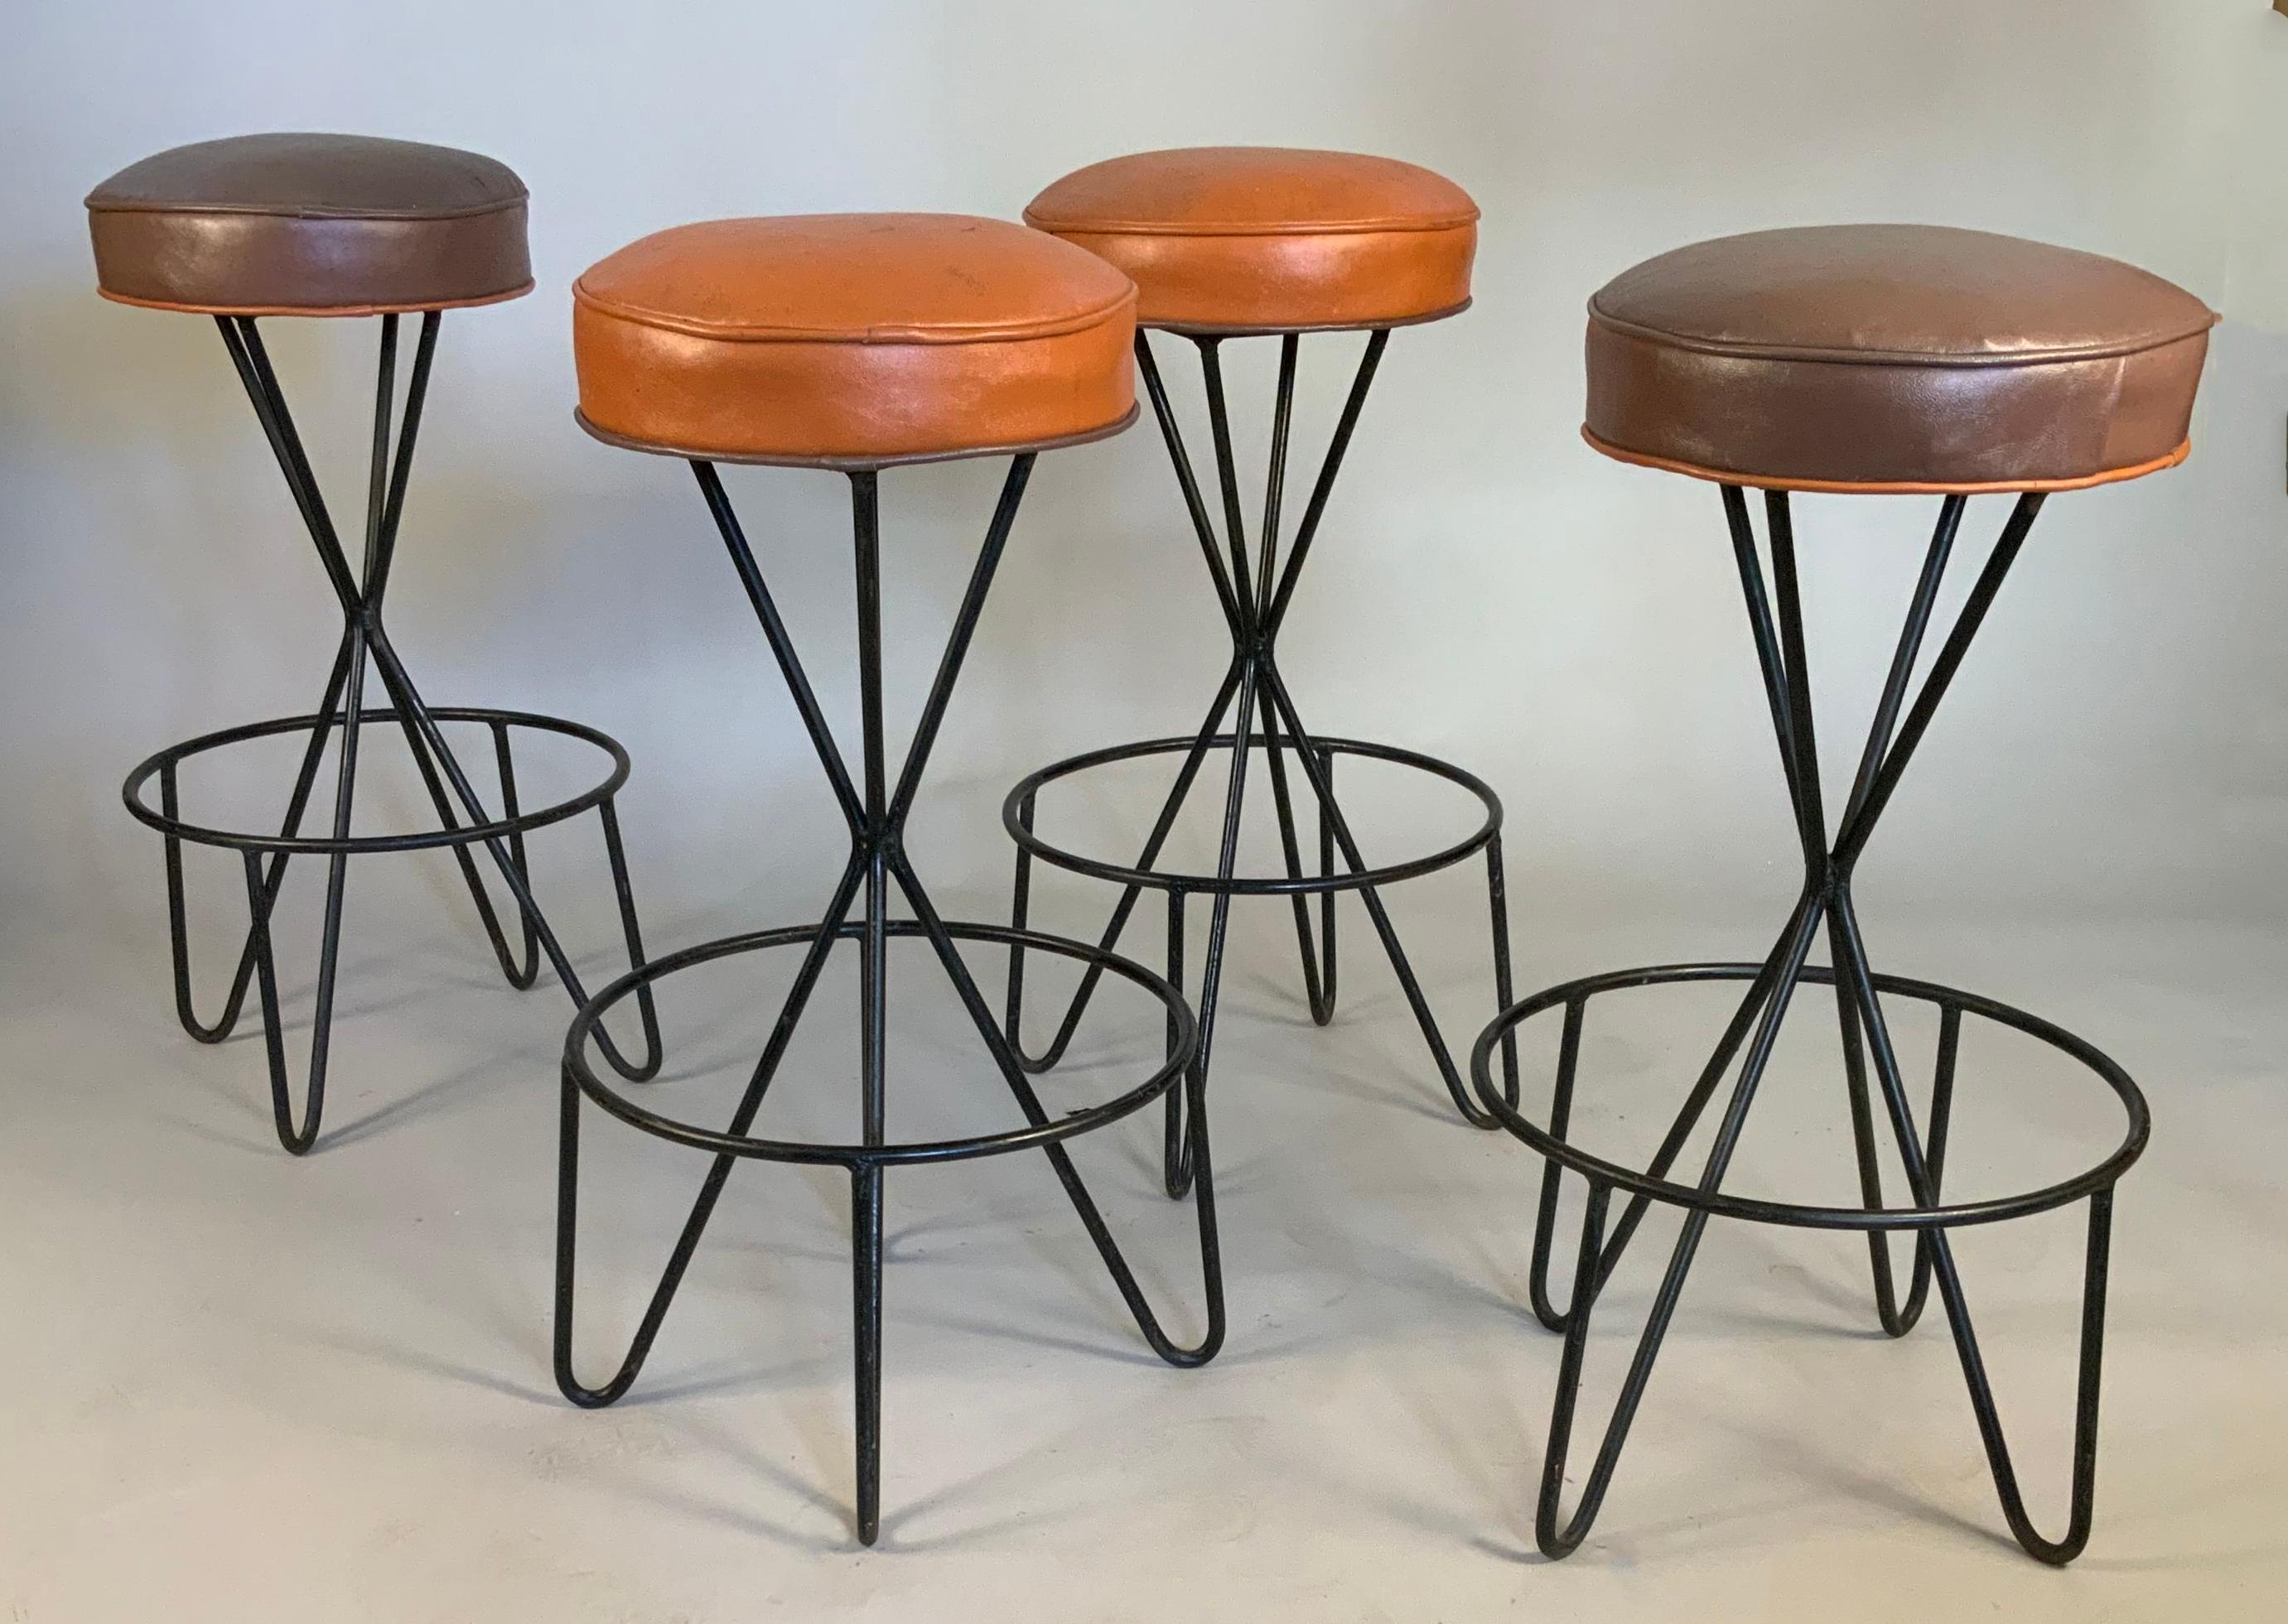 A beautiful set of four vintage 1950's Iron base swivel barstools by Paul Tuttle. very nice design with the iron frame gathered in the center of the base, and an iron ring footrest as well. the thick padded seats are in their original vinyl, two